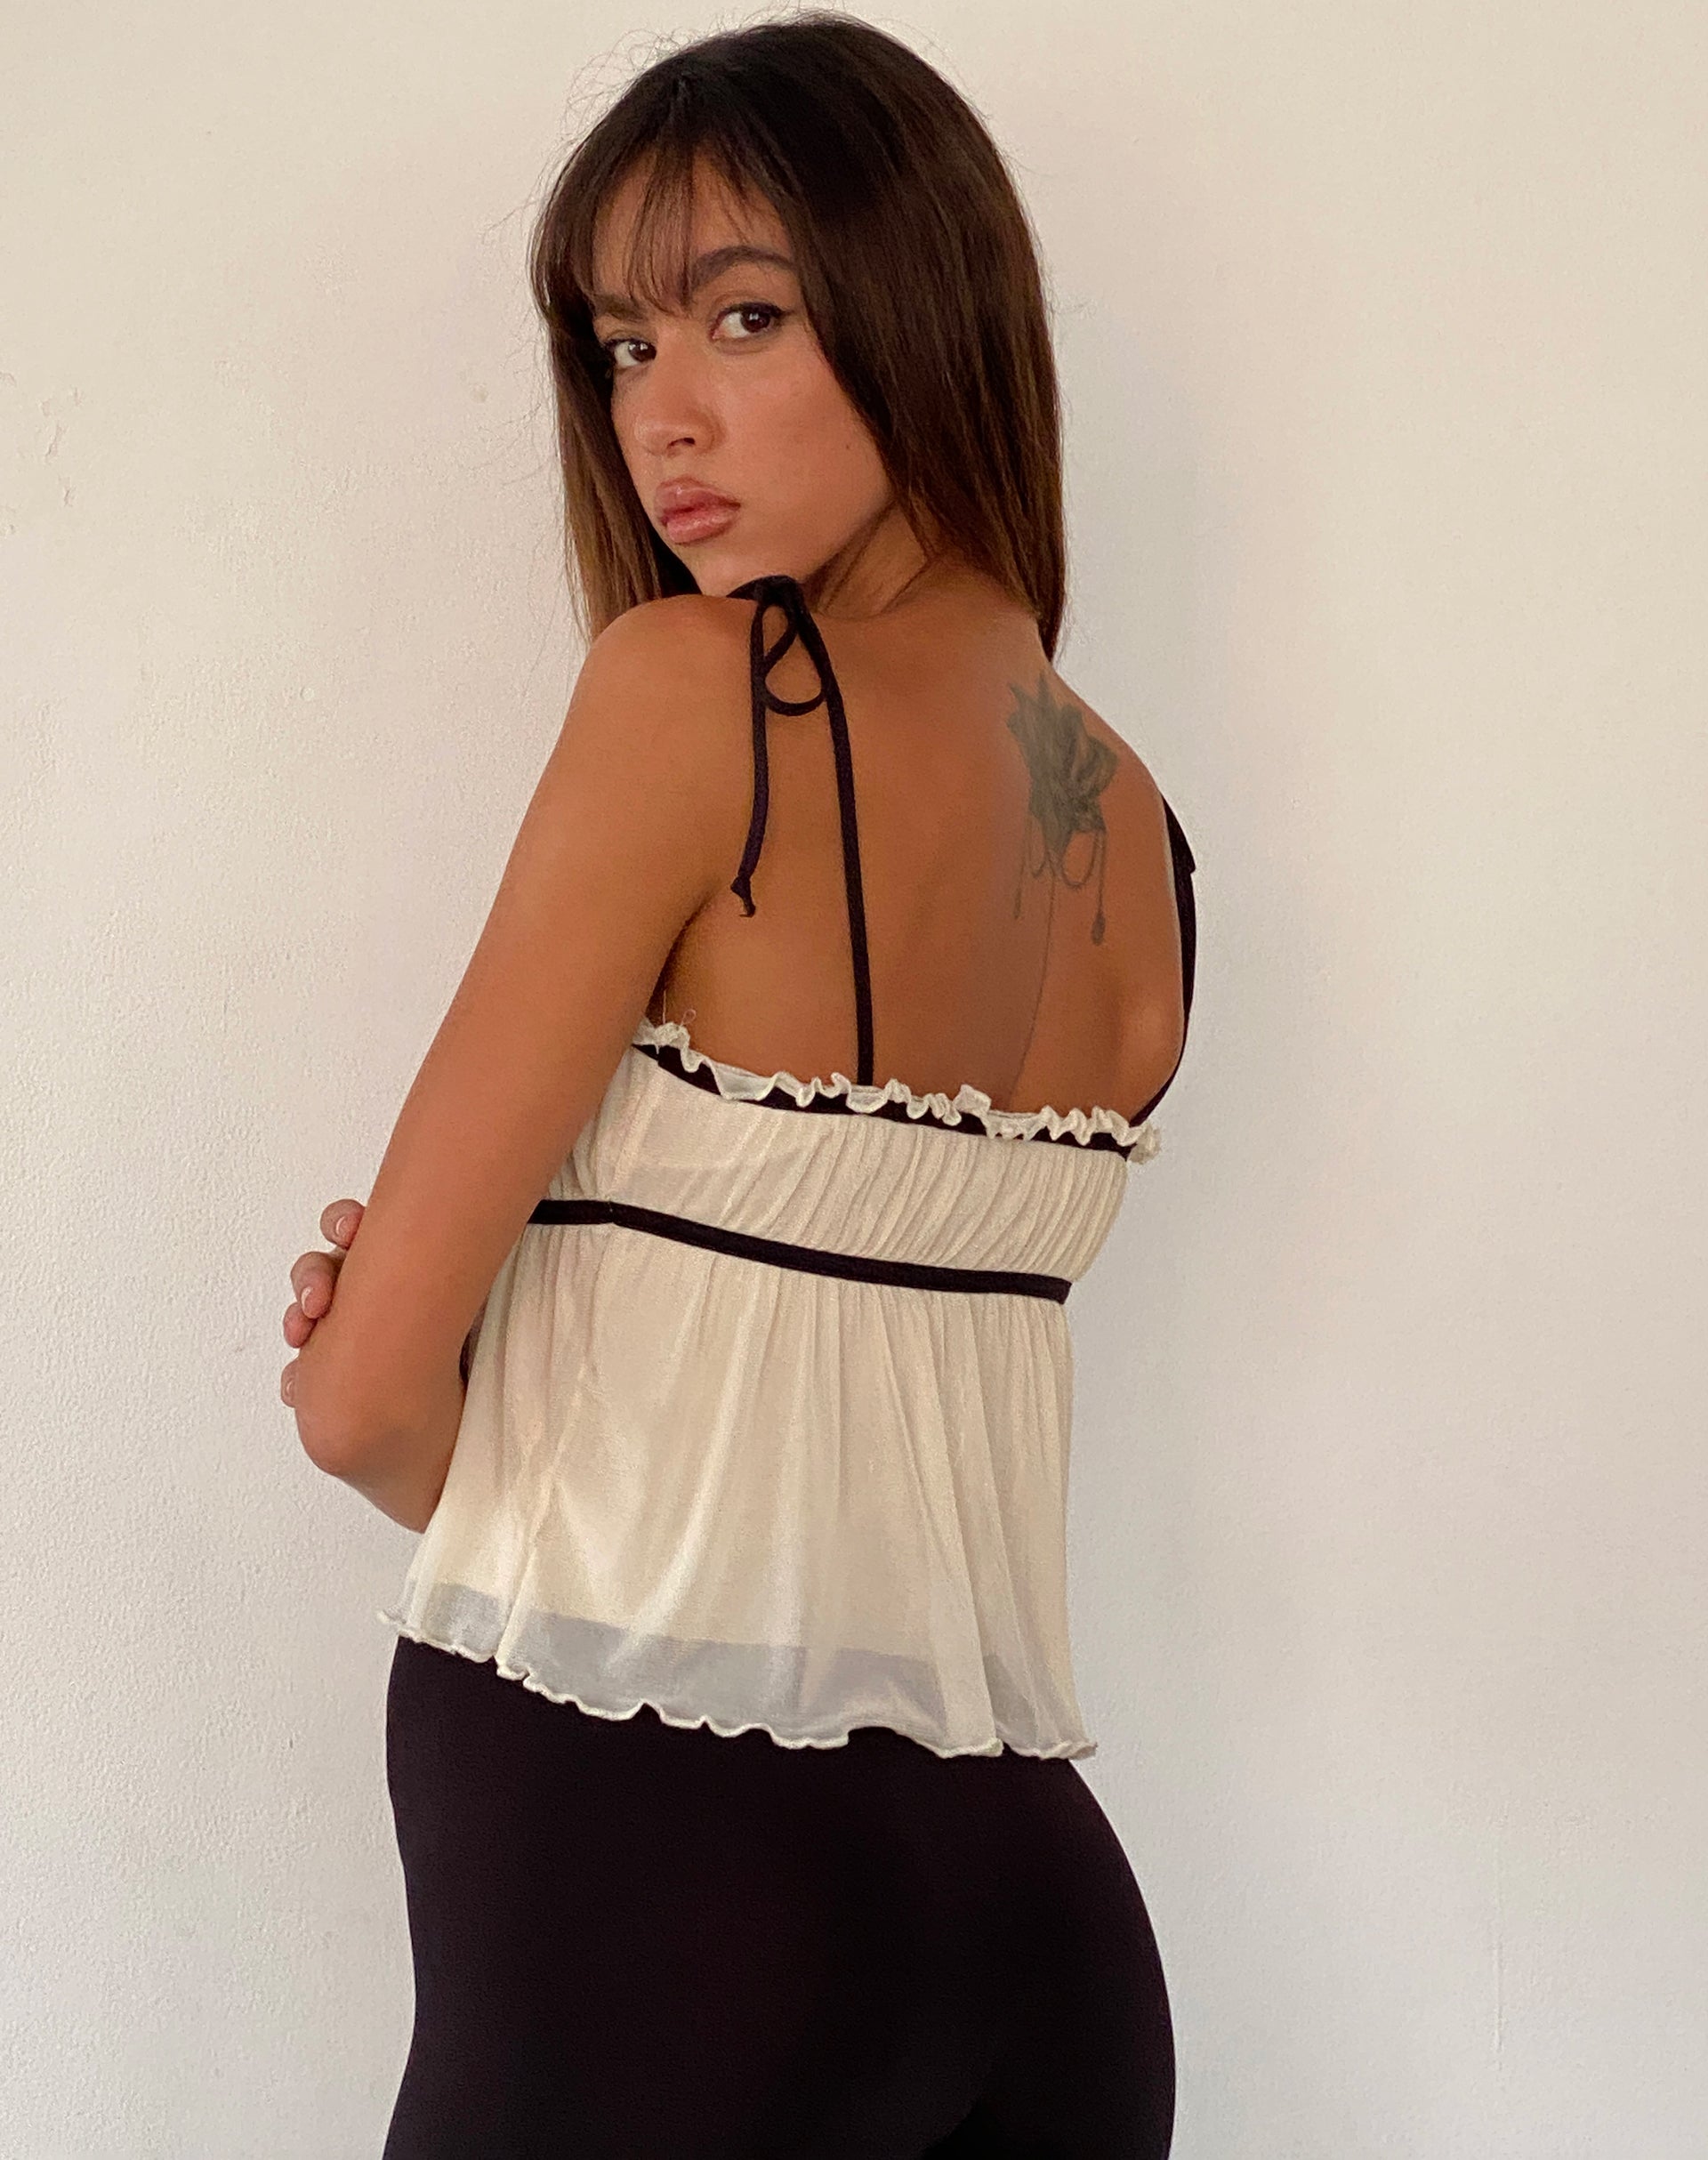 Image of Damaris Frill Cami Top in Cream with Black Centre Bow